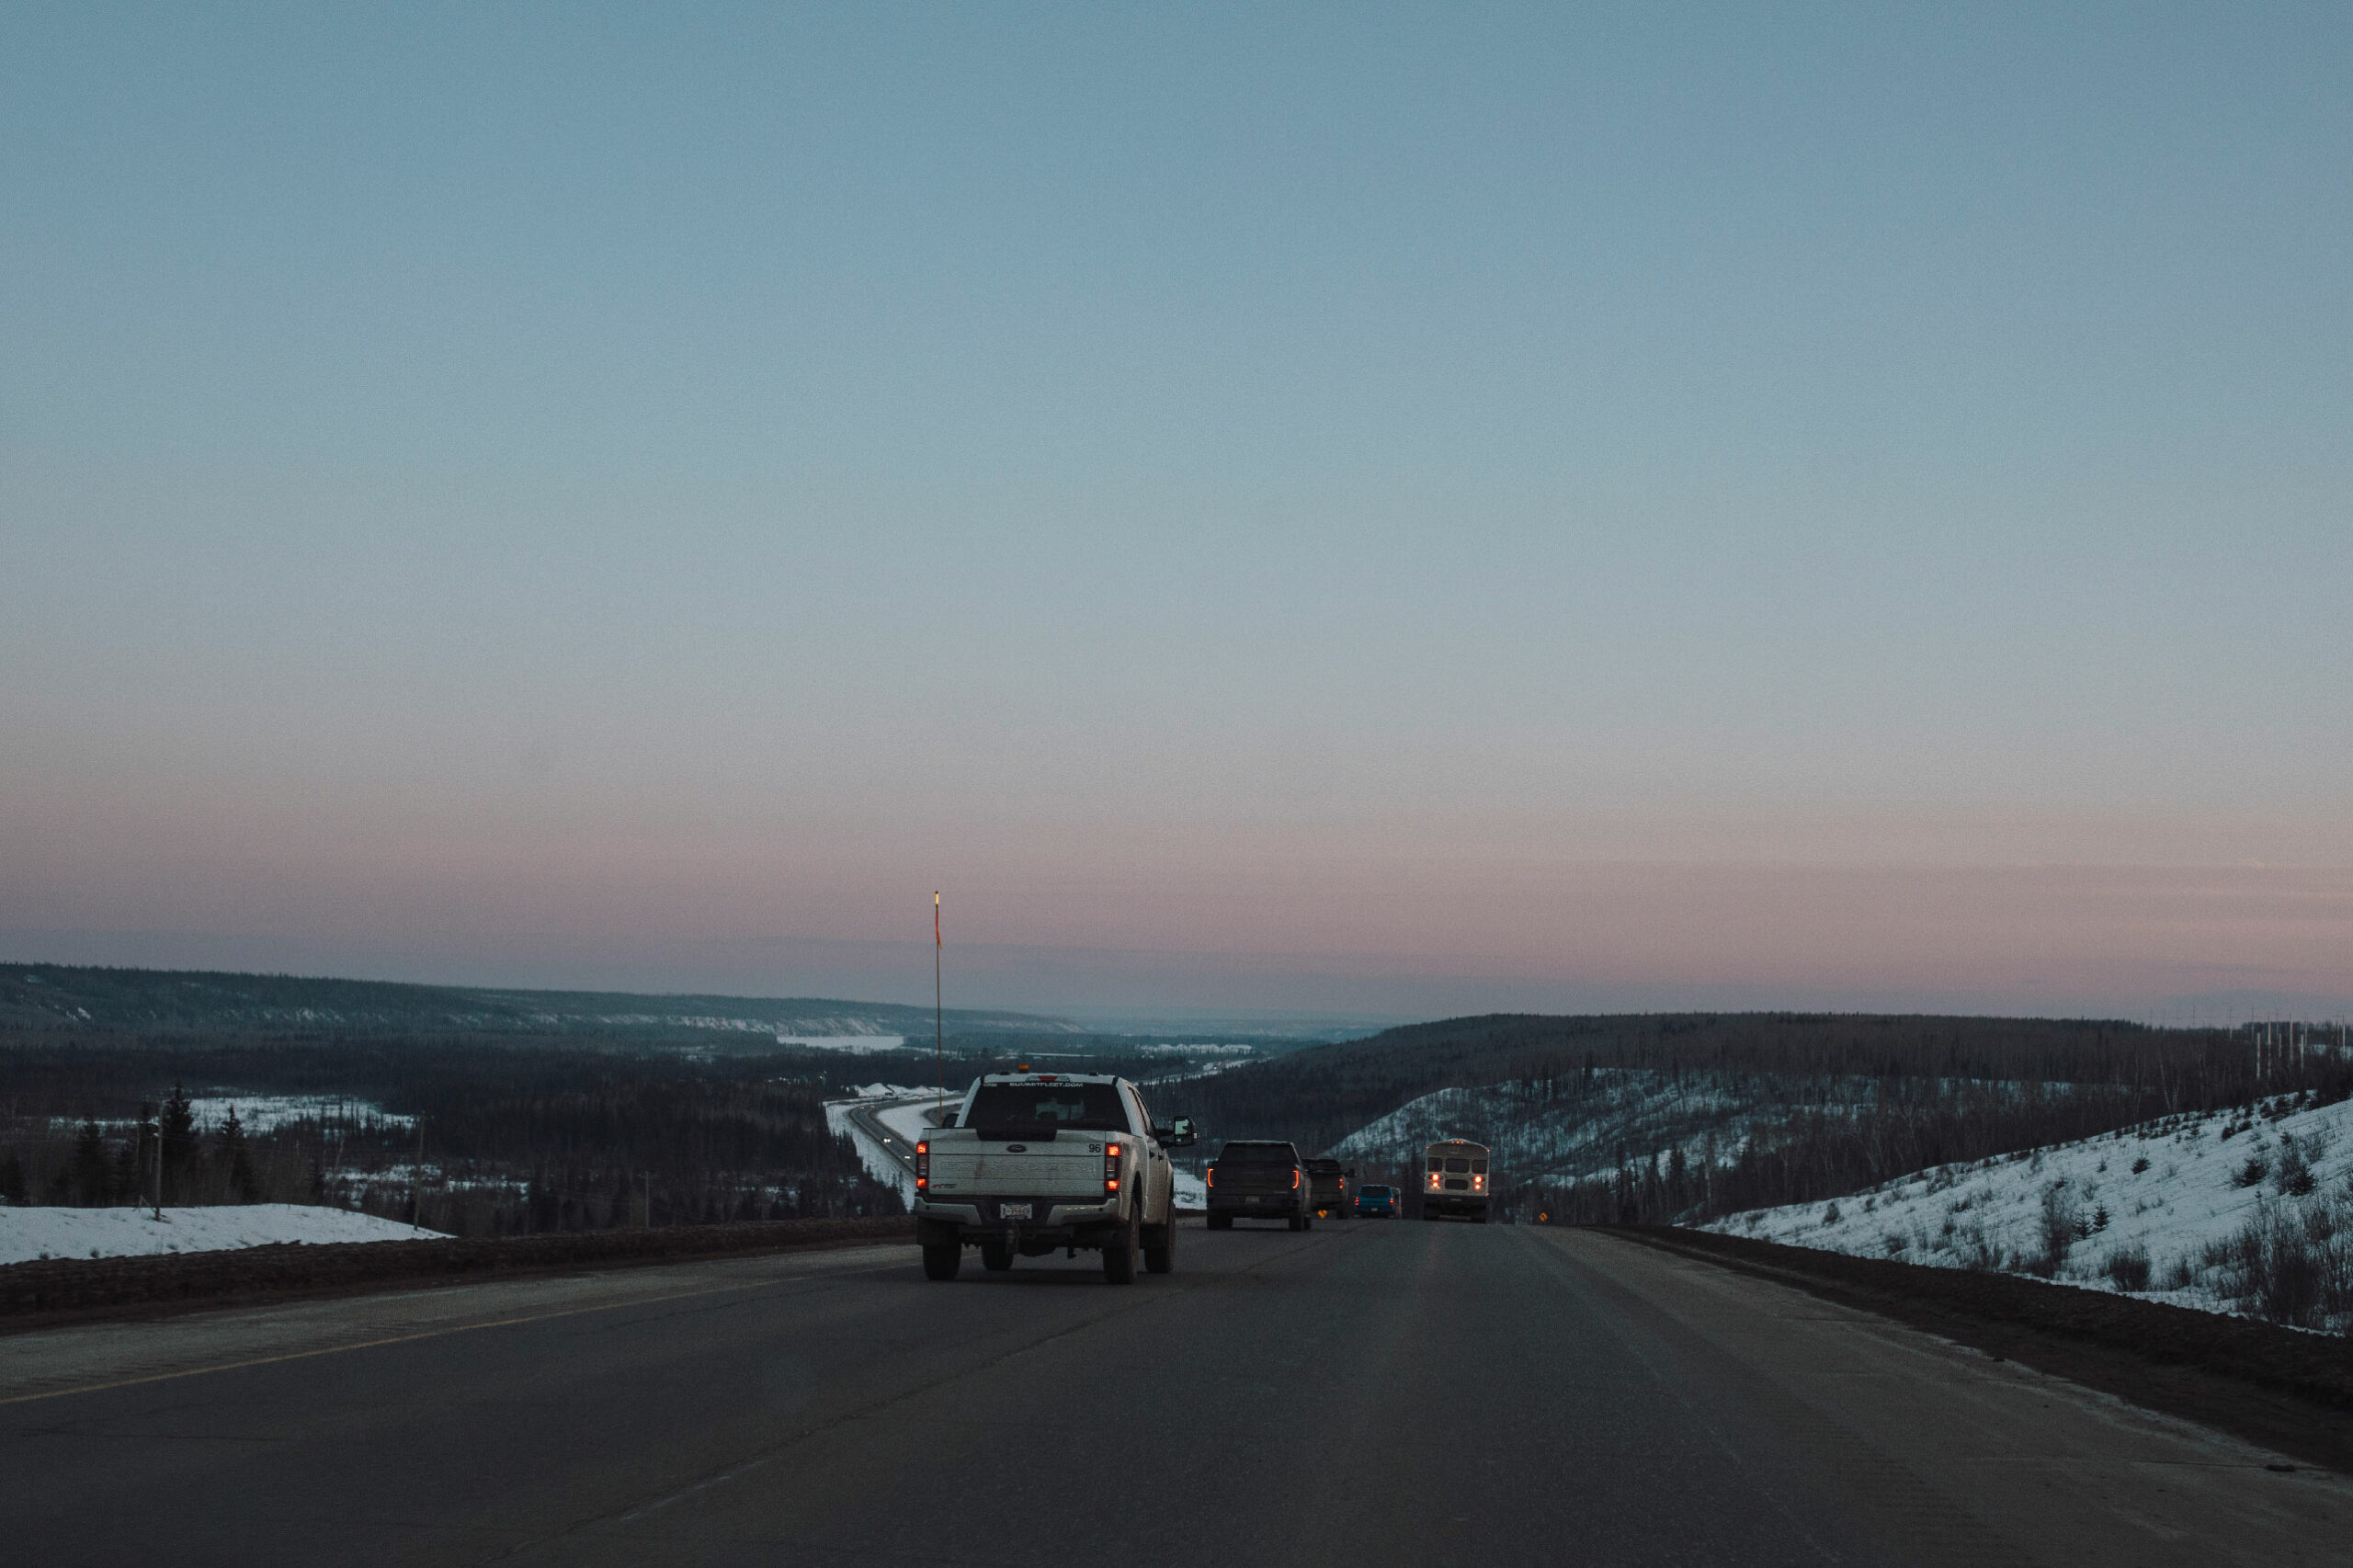 Pickup trucks drive down a wide highway under a twilight sky.